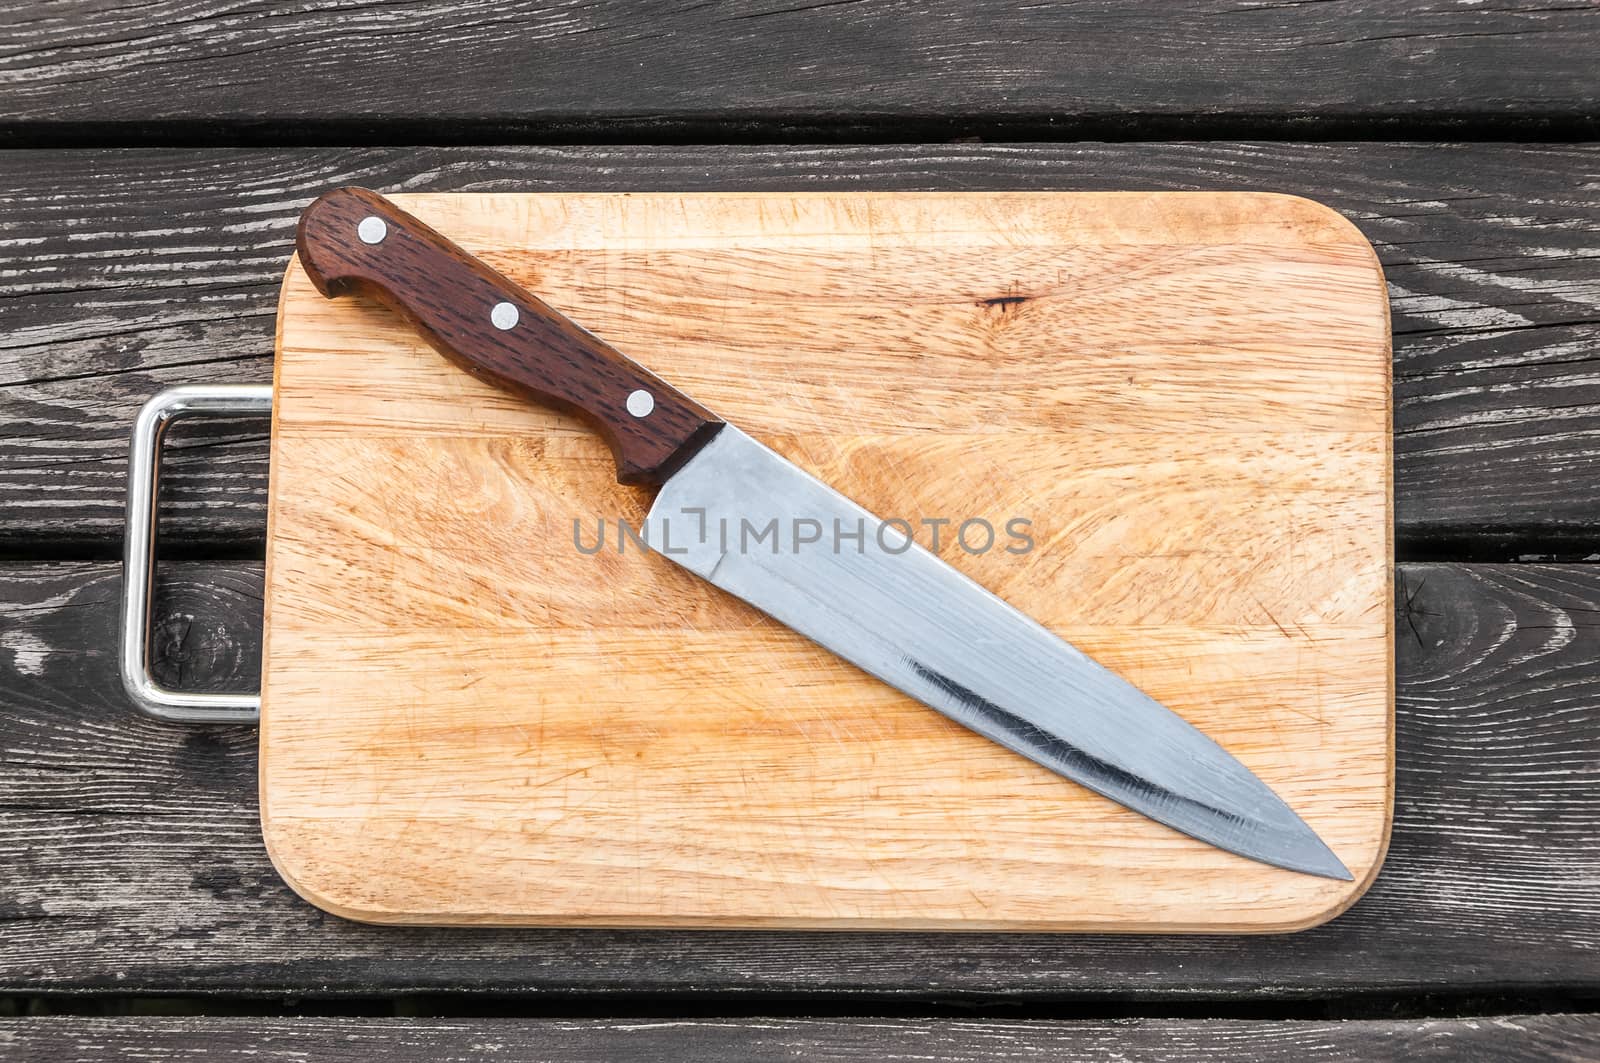 Steel knife on a cutting board on wooden background with 